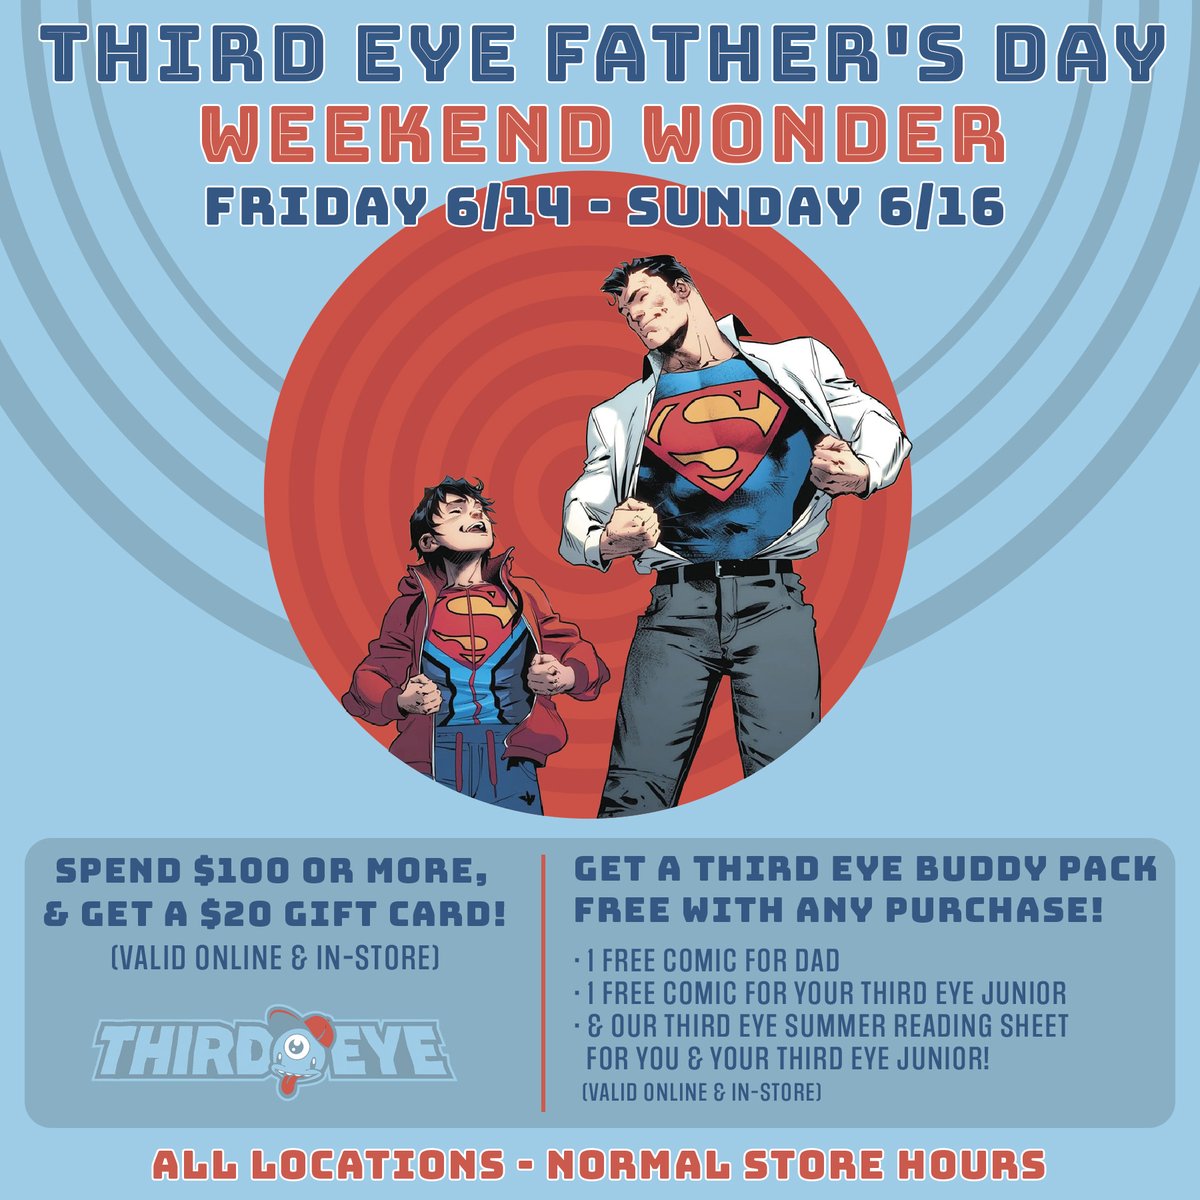 Get ready, this June is our THIRD EYE FATHER'S DAY WEEKEND WONDER!!! Bring your Third Eye Dads by the weekend of 6/14 through 6/16 & get a $20 gift card when u spend $100 or more! PLUS: a FREE Third Eye Buddy Pack for you & your Third Eye Junior!!!